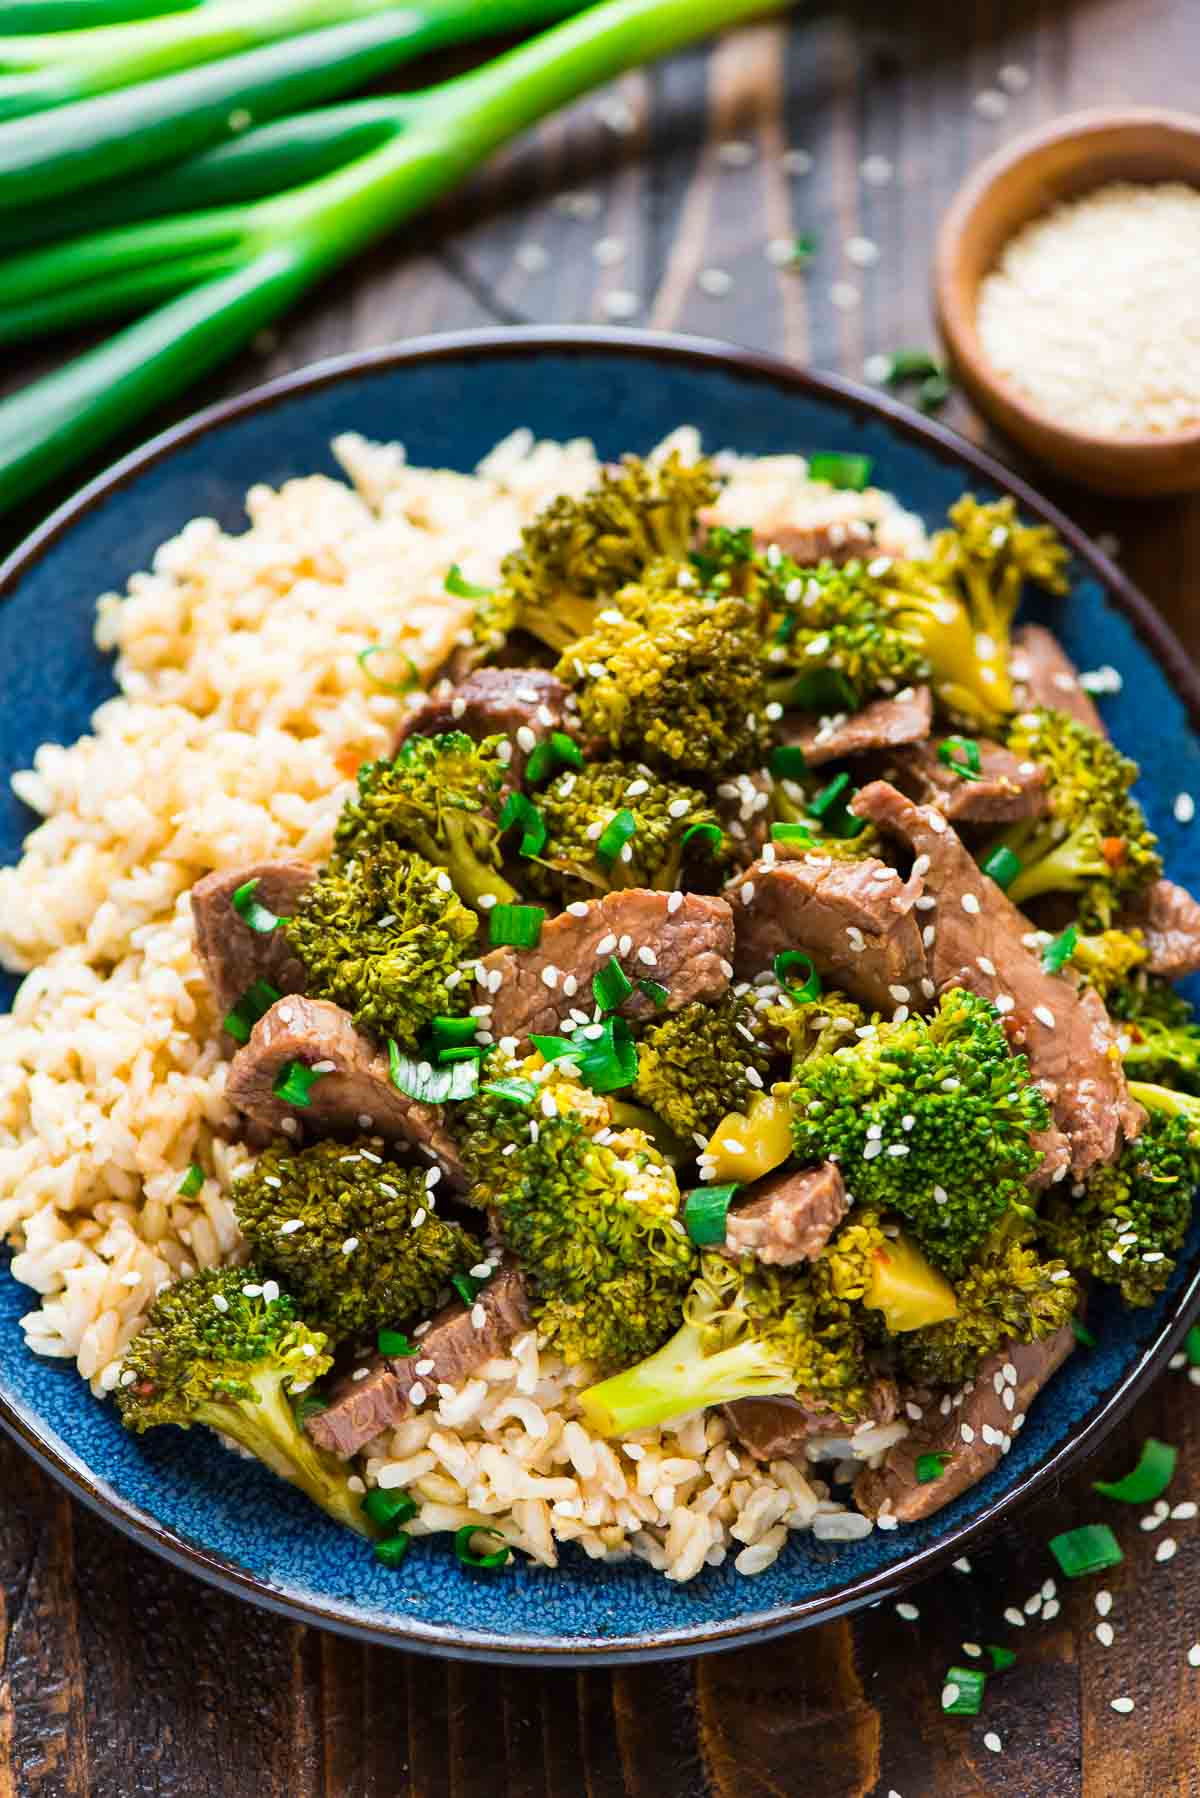 Healthy Slow Cooker Recipes
 Slow Cooker Beef and Broccoli